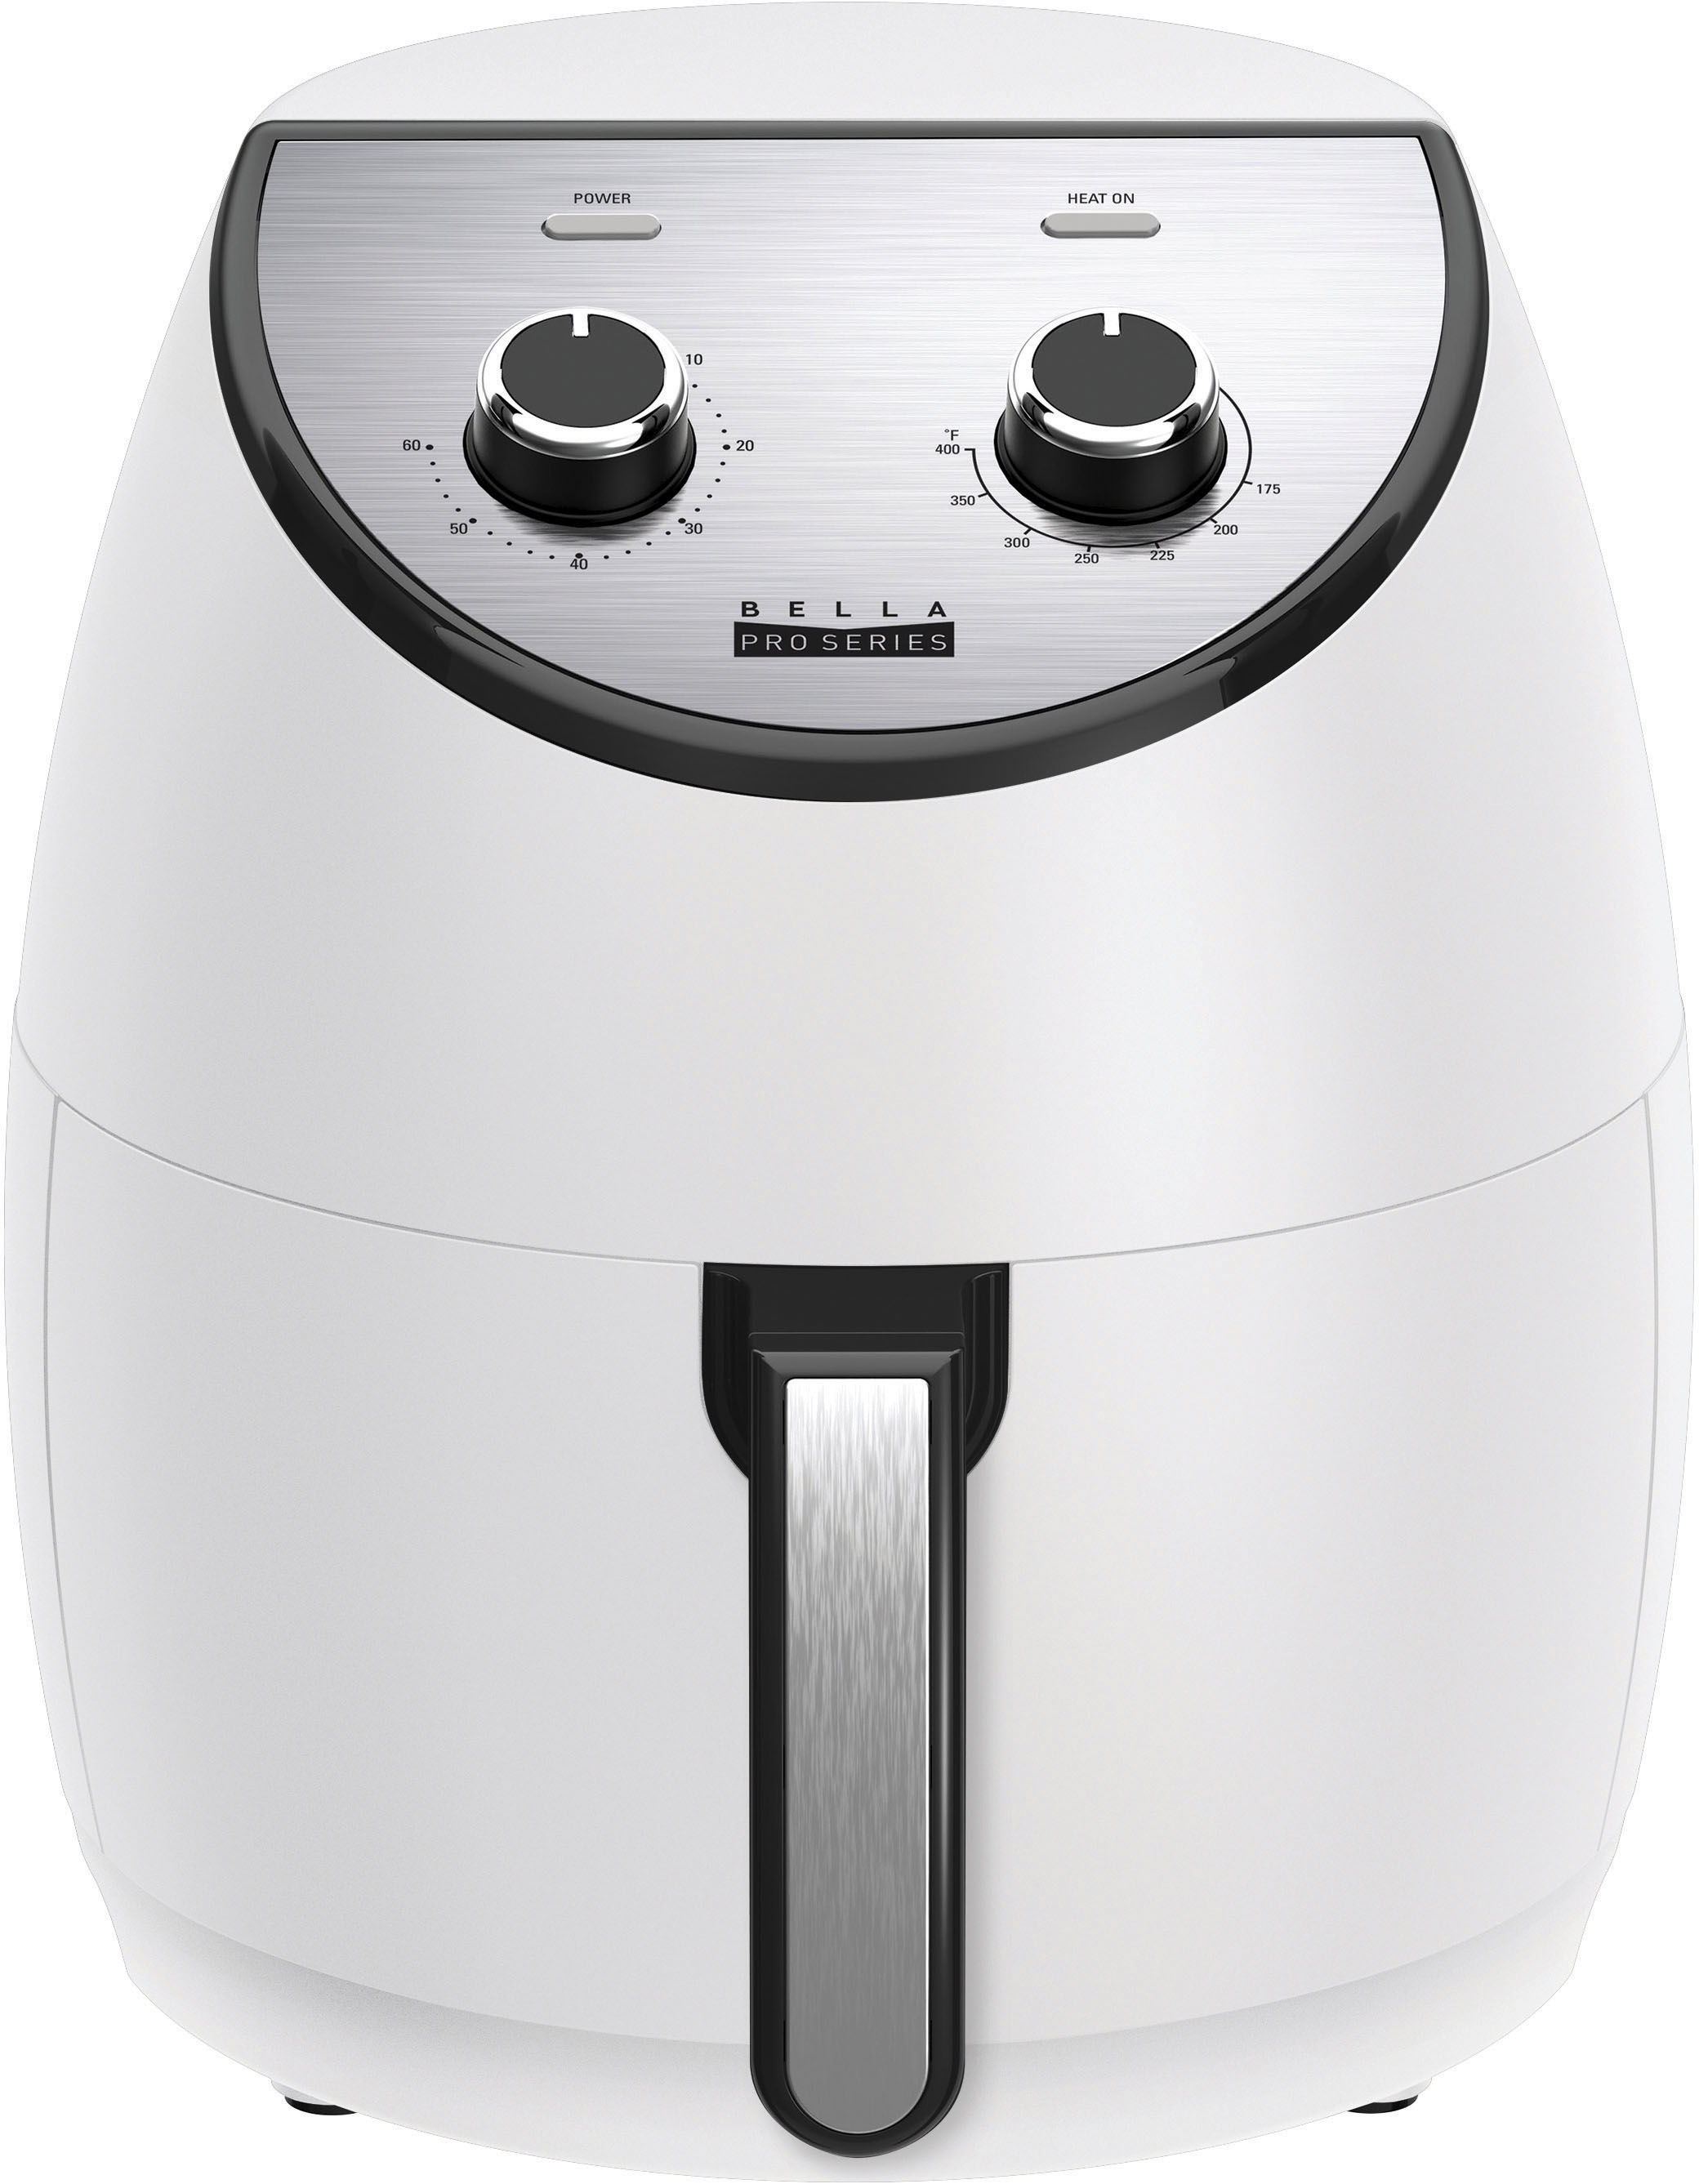 Angle View: Bella Pro Series - 4.2-qt. Analog Air Fryer with Matte Finish - Matte White